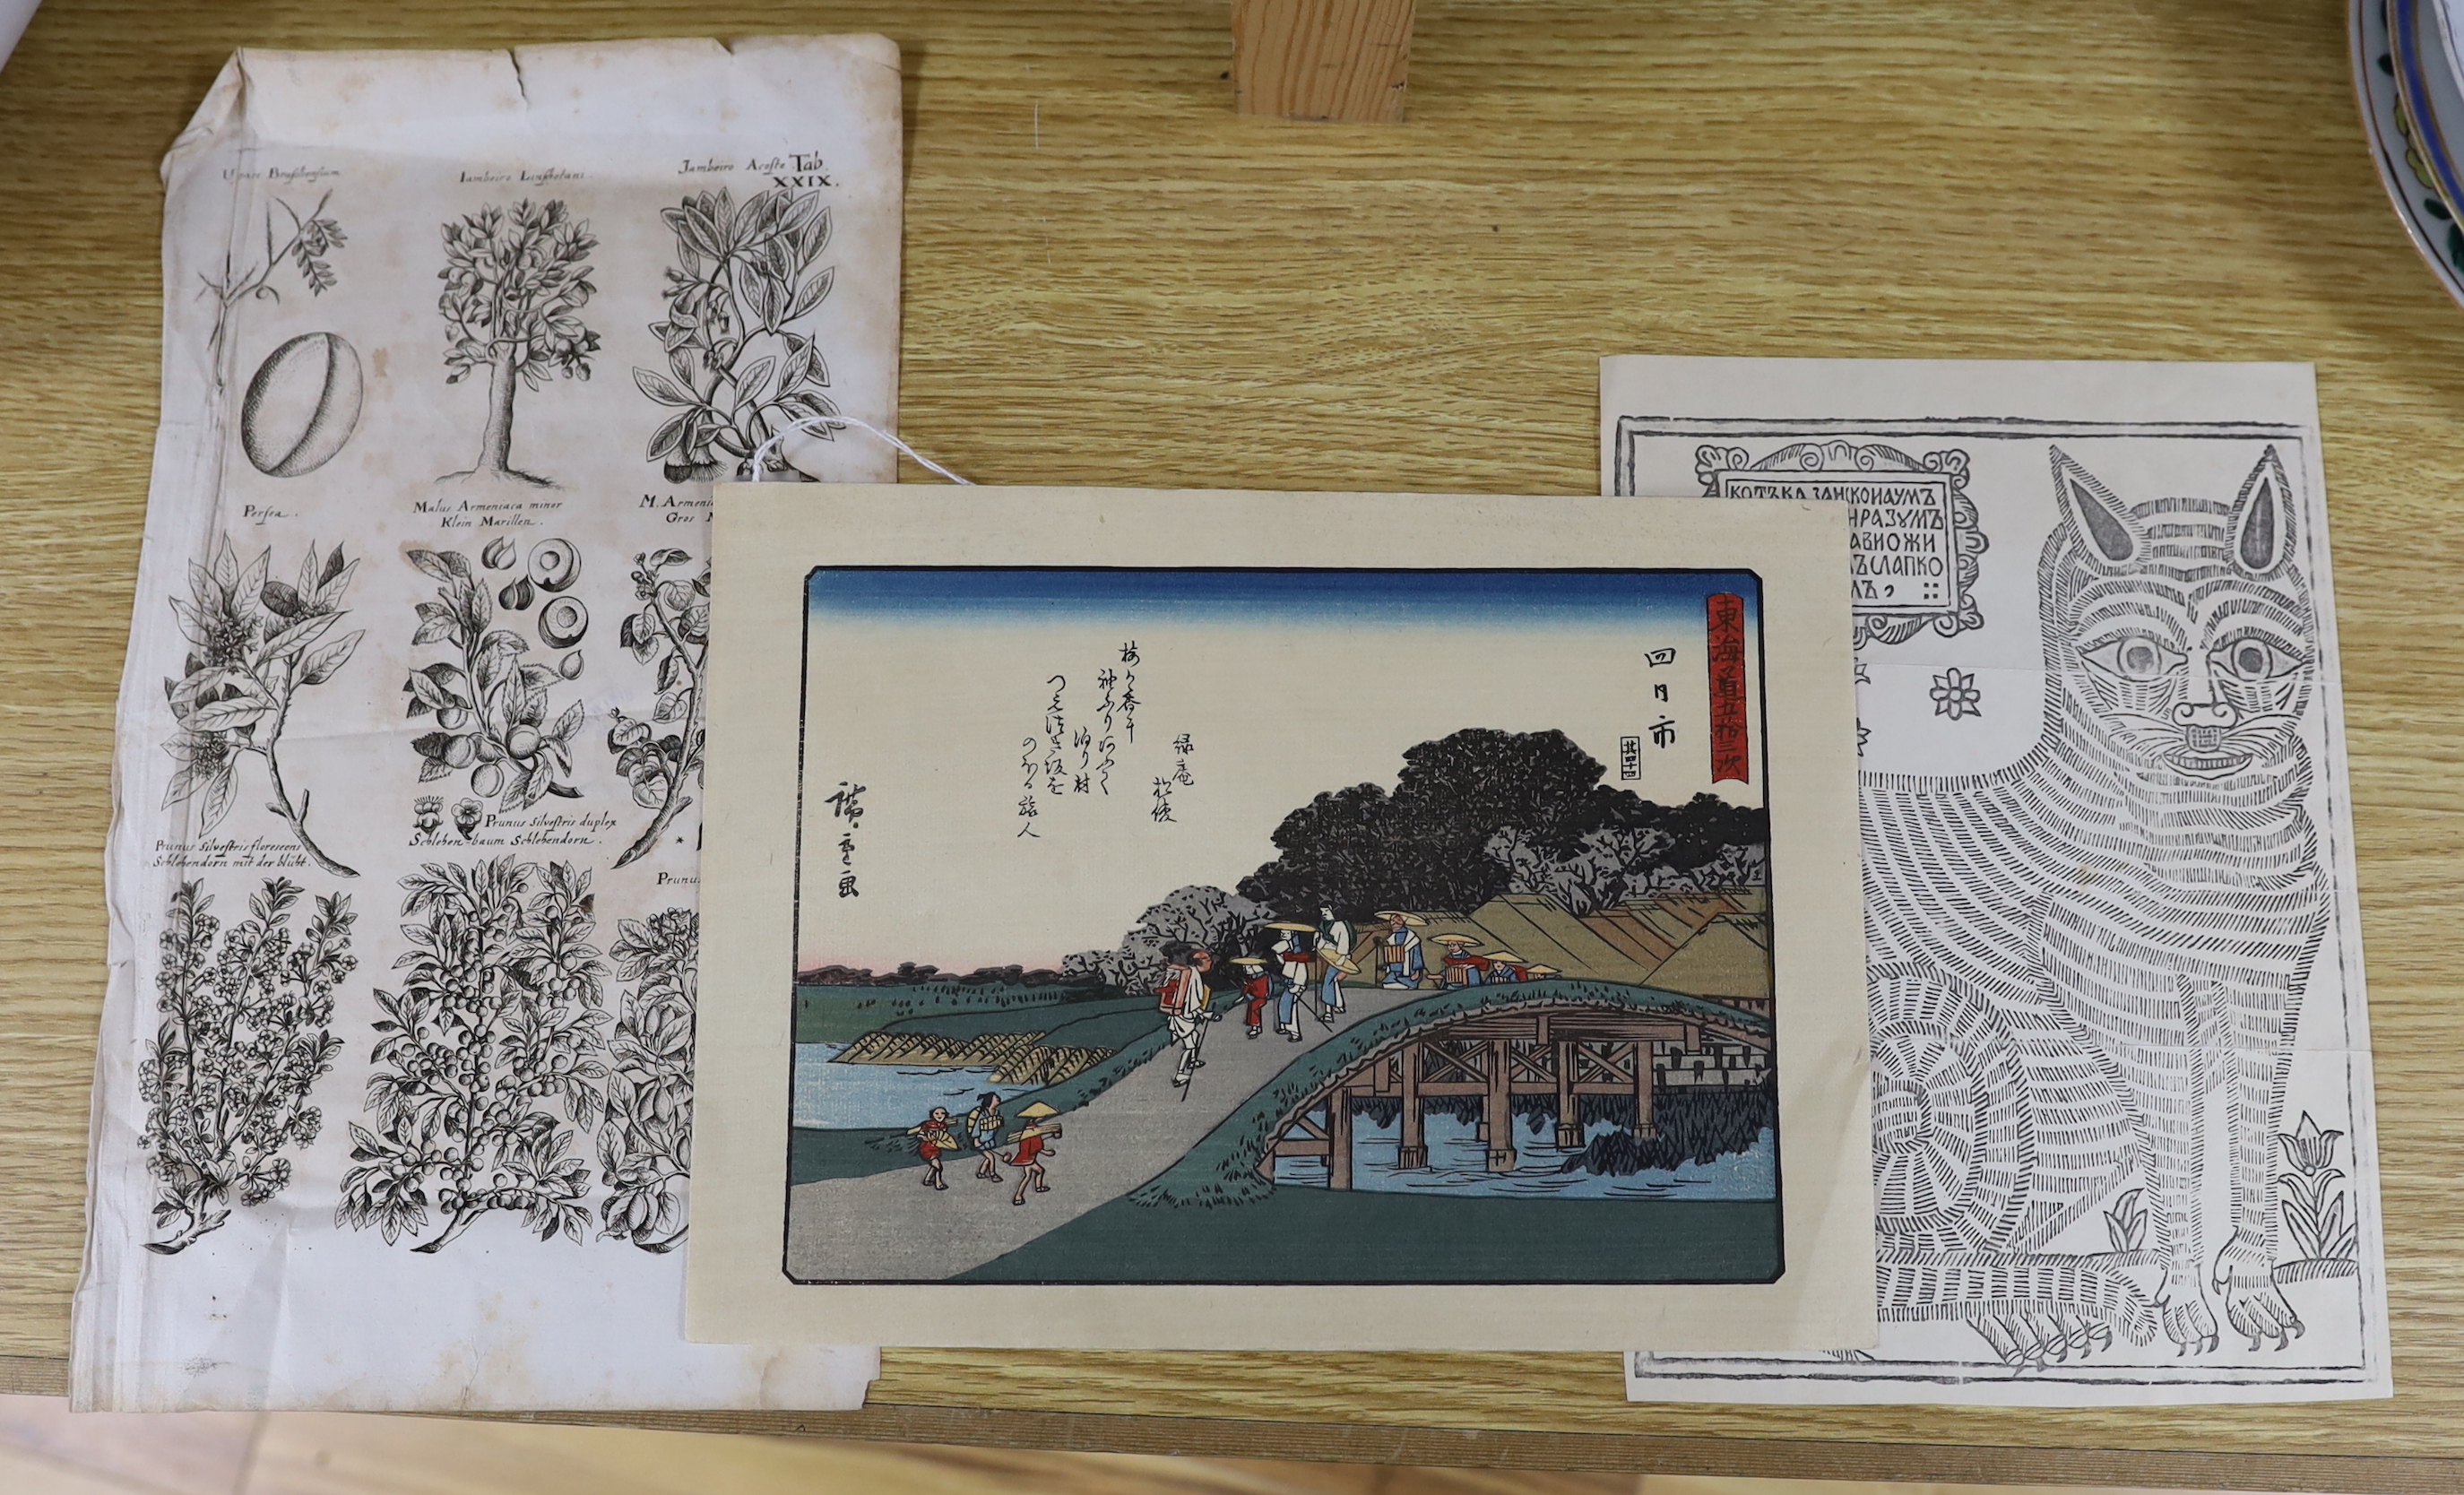 After Utagawa Hiroshige (Japanese, 1797-1858), woodblock print, Yokkaichi, with an antique botanical engraving and a Russian print, 'The Cat from Kazan', largest 34 x 19cm, unframed                                       